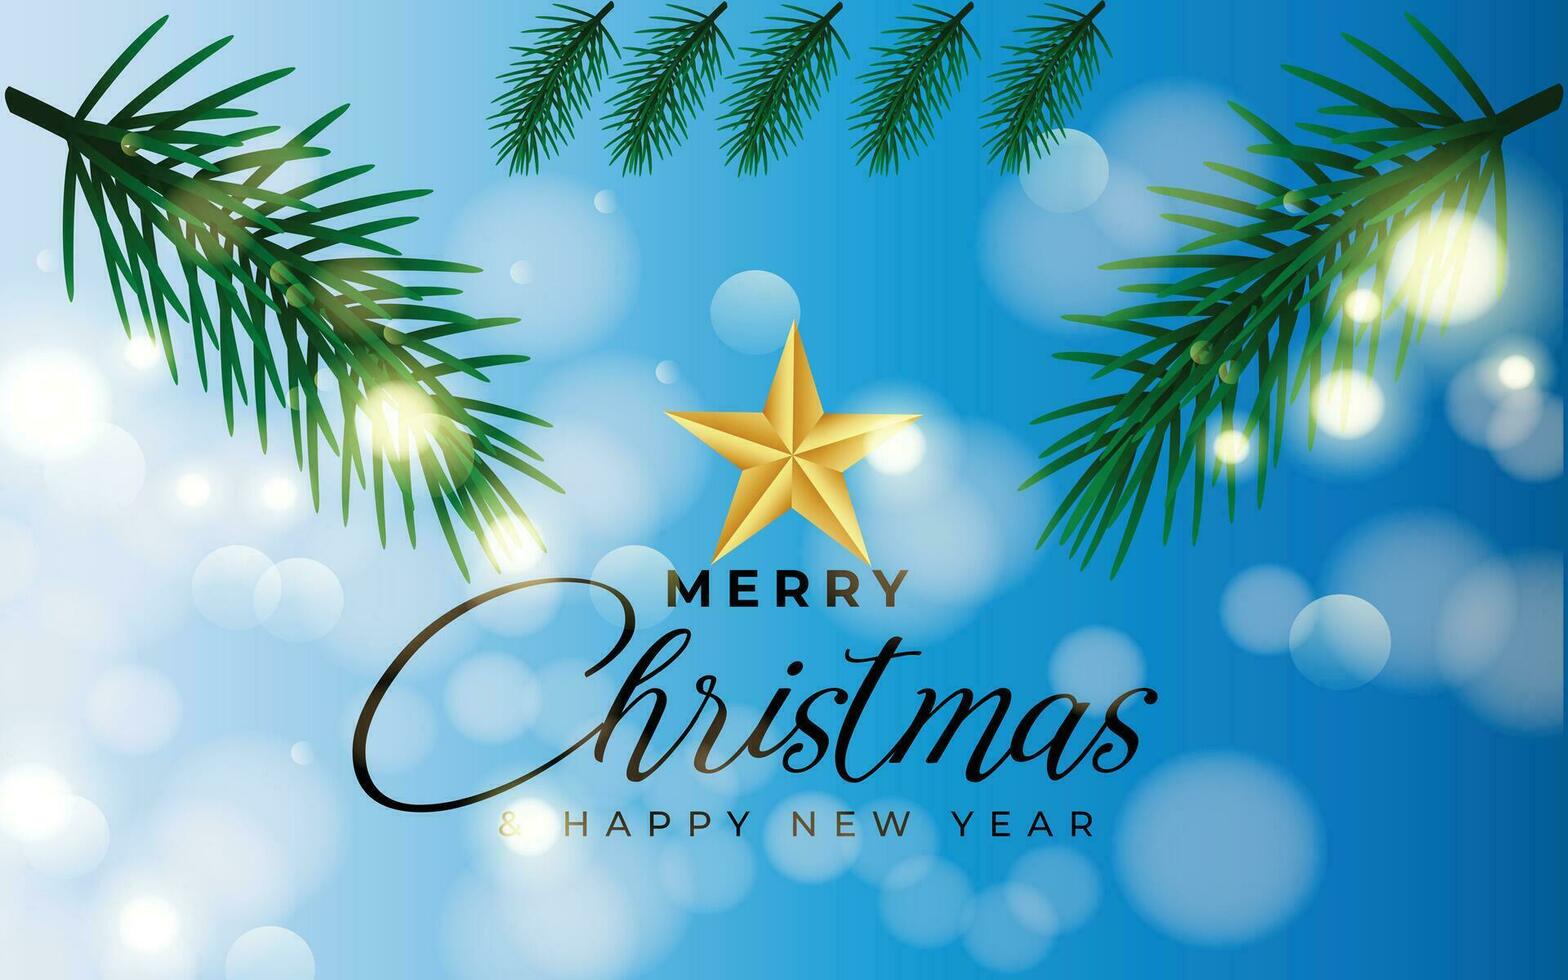 merry christmas background with christmas tree vector